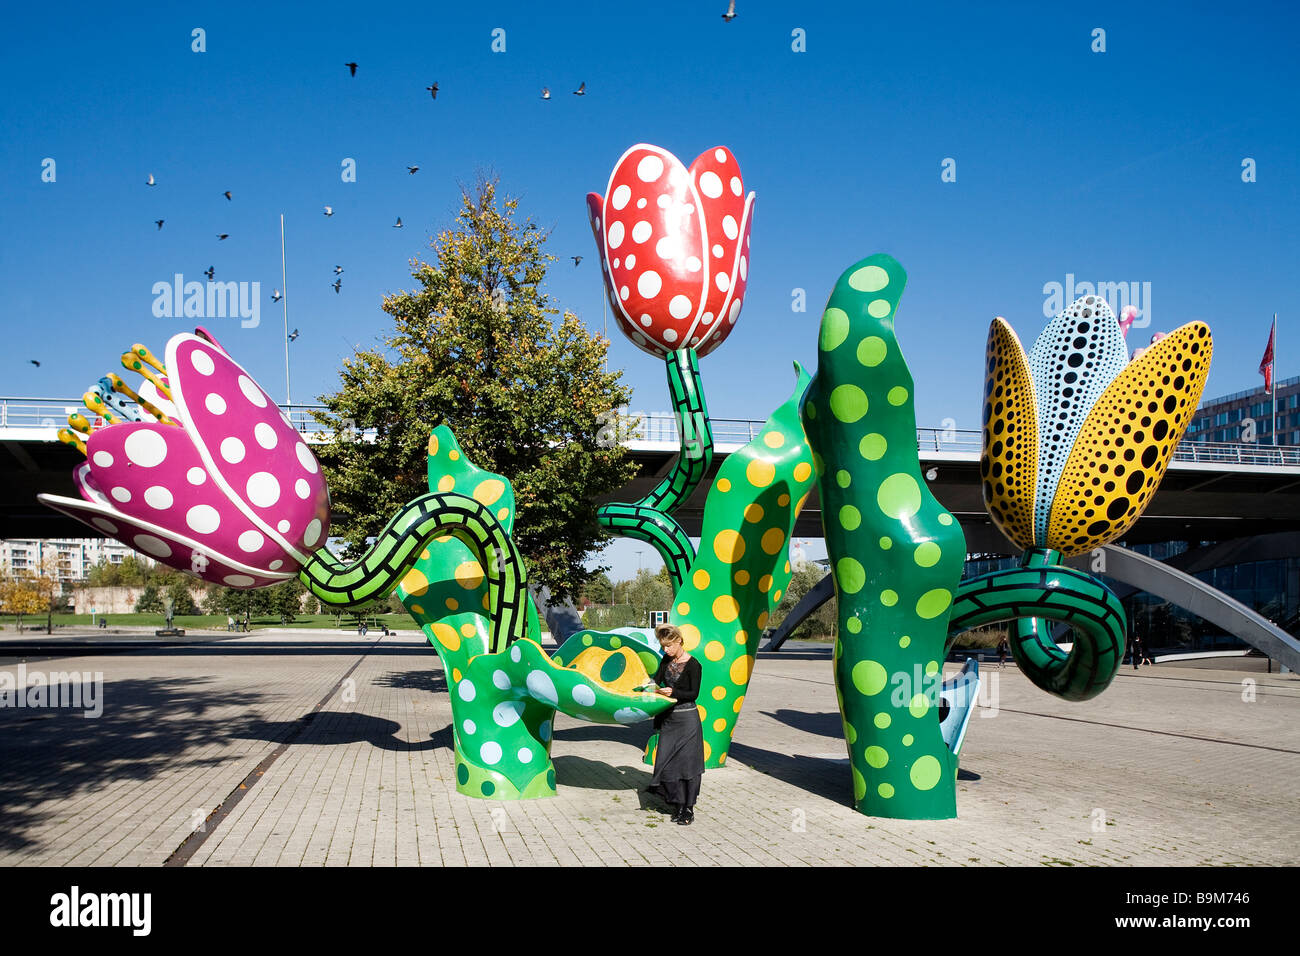 France, Nord, Lille, Euralille District, Esplanade Francois Mitterrand, Shangri-La Tulips, permanent sculpture by Yayoi Kusama Stock Photo